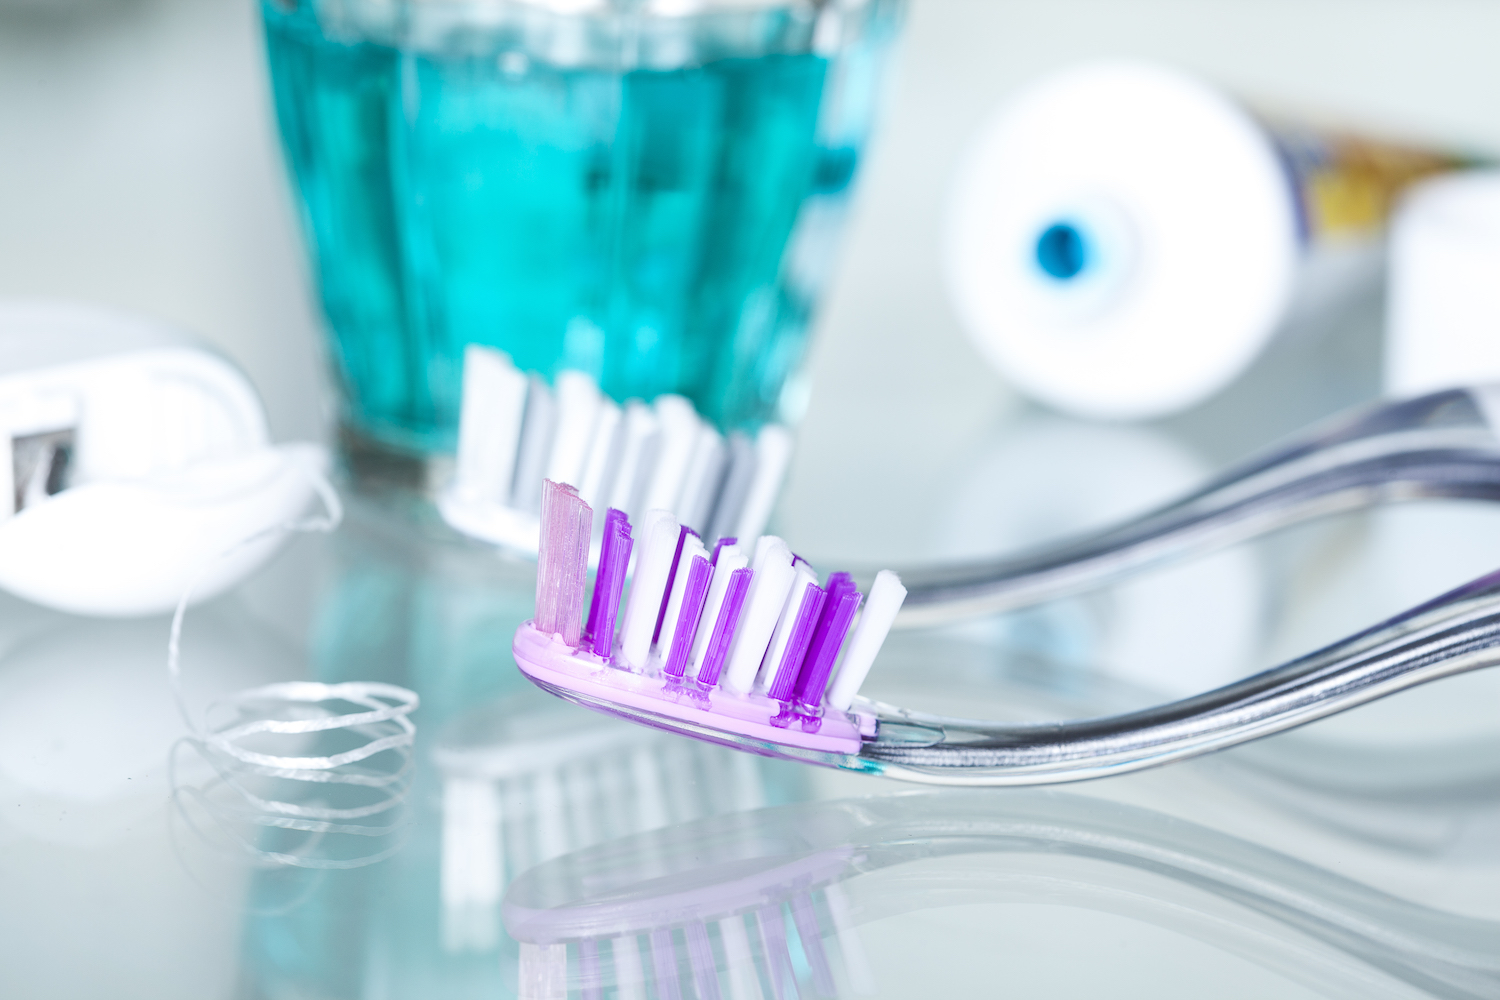 Closeup view dental health care objects